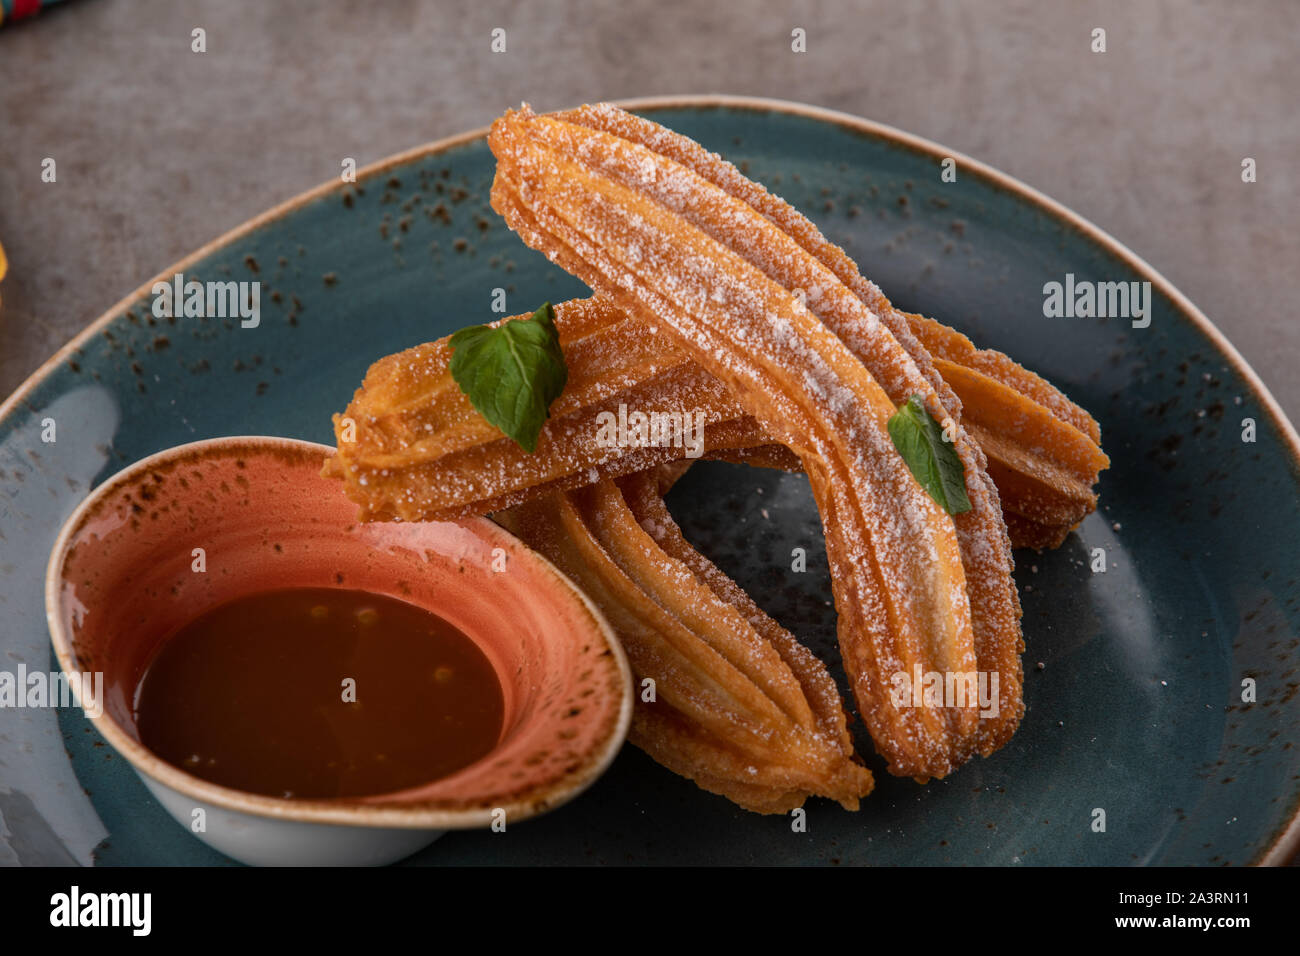 Churros with sugar and chocolate sauce, mint. Stock Photo